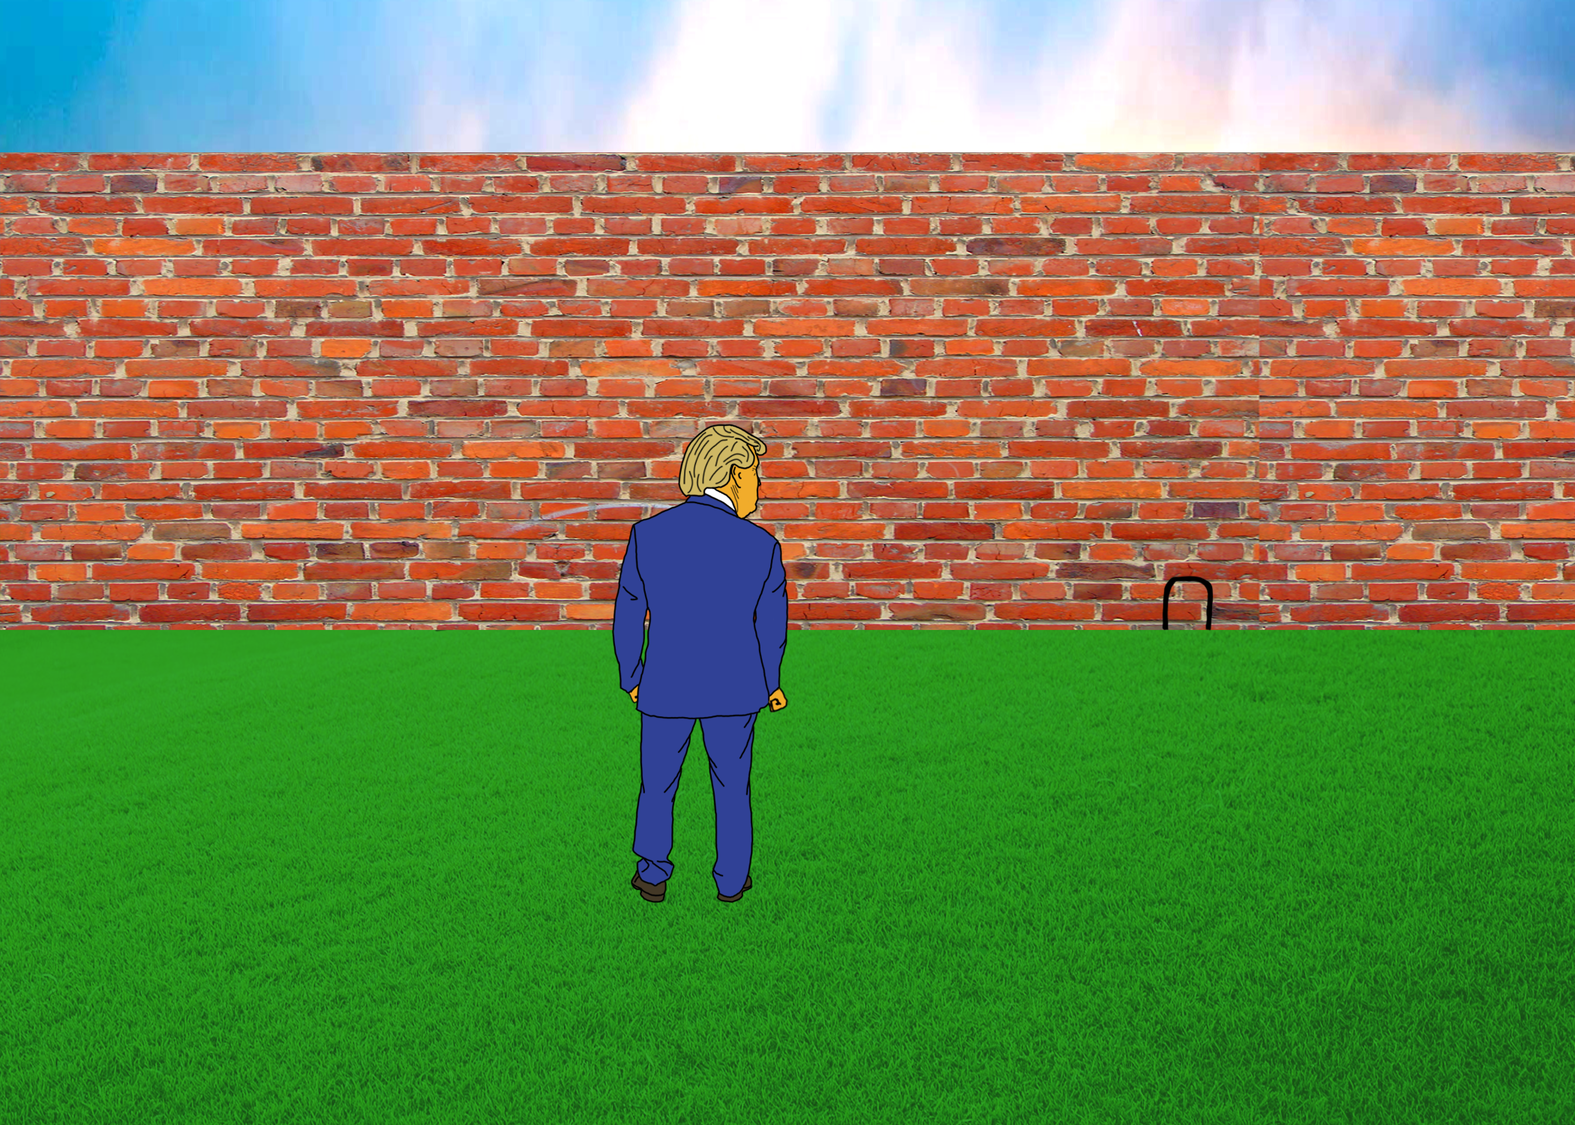 Trump Builds His Wall